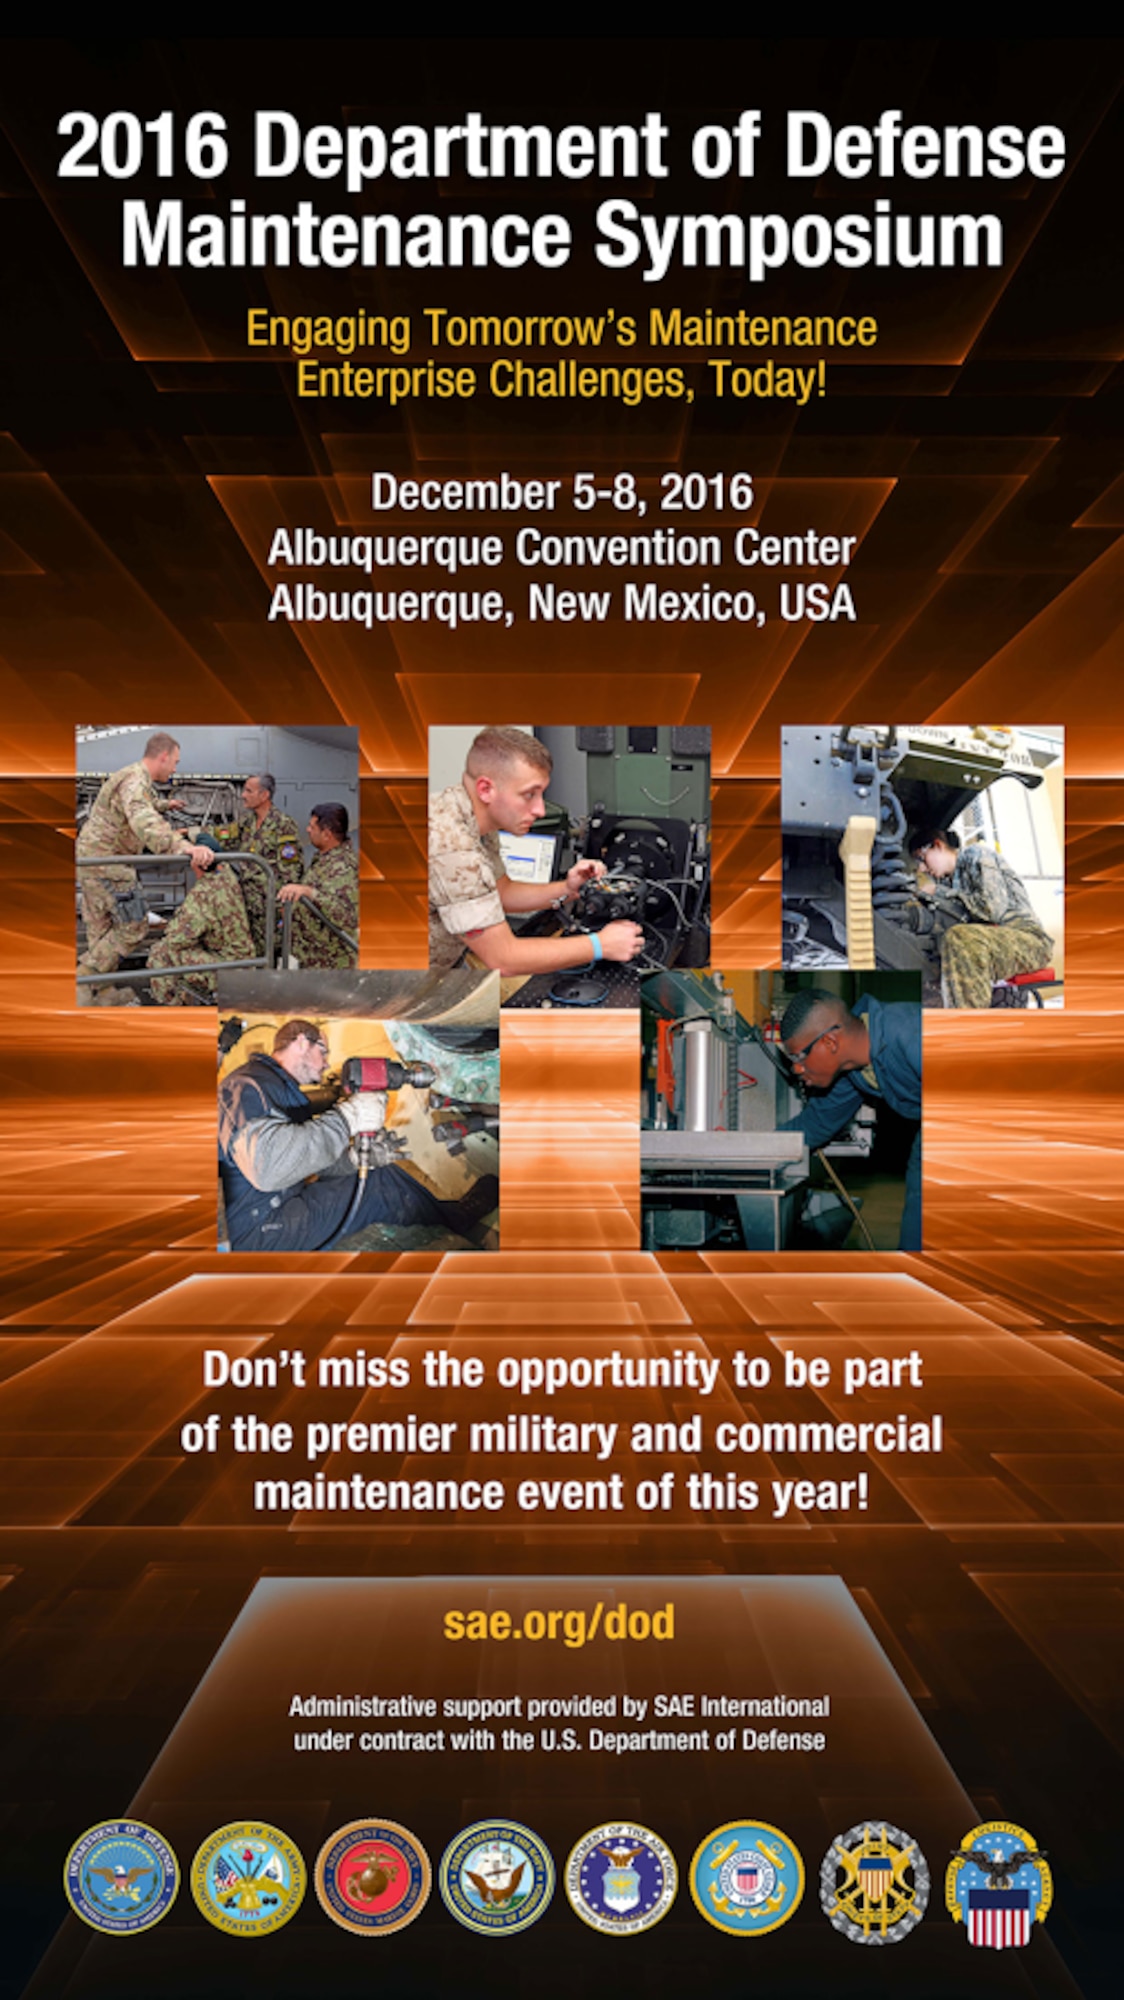 Kirtland officials are taking part in the 2016 Department of Defense Maintenance Symposium Dec. 5-8 at the Albuquerque Convention Center here.
The Symposium, carrying this year’s theme, “Engaging Tomorrow’s Maintenance Enterprise Challenges Today,” will bring together U.S. government and industry maintenance managers of all ranks and levels. It is the only official DoD event solely focused on the maintenance of weapon systems and equipment. The agenda includes events ranging from a senior logistics roundtable to the maintenance innovation challenge and also features the annual Secretary of Defense Maintenance Awards ceremony.
The event has been co-located with the concurrent Defense Maintenance and Logistics Exhibition, also happening at the Convention Center.
For more information or to attend, call Event Manager Sherry McCaskey at 724-612-7305, or visit www.sae.org/events/defexpo.
For more on Kirtland’s participation, call Public Affairs at 505-846-5991.